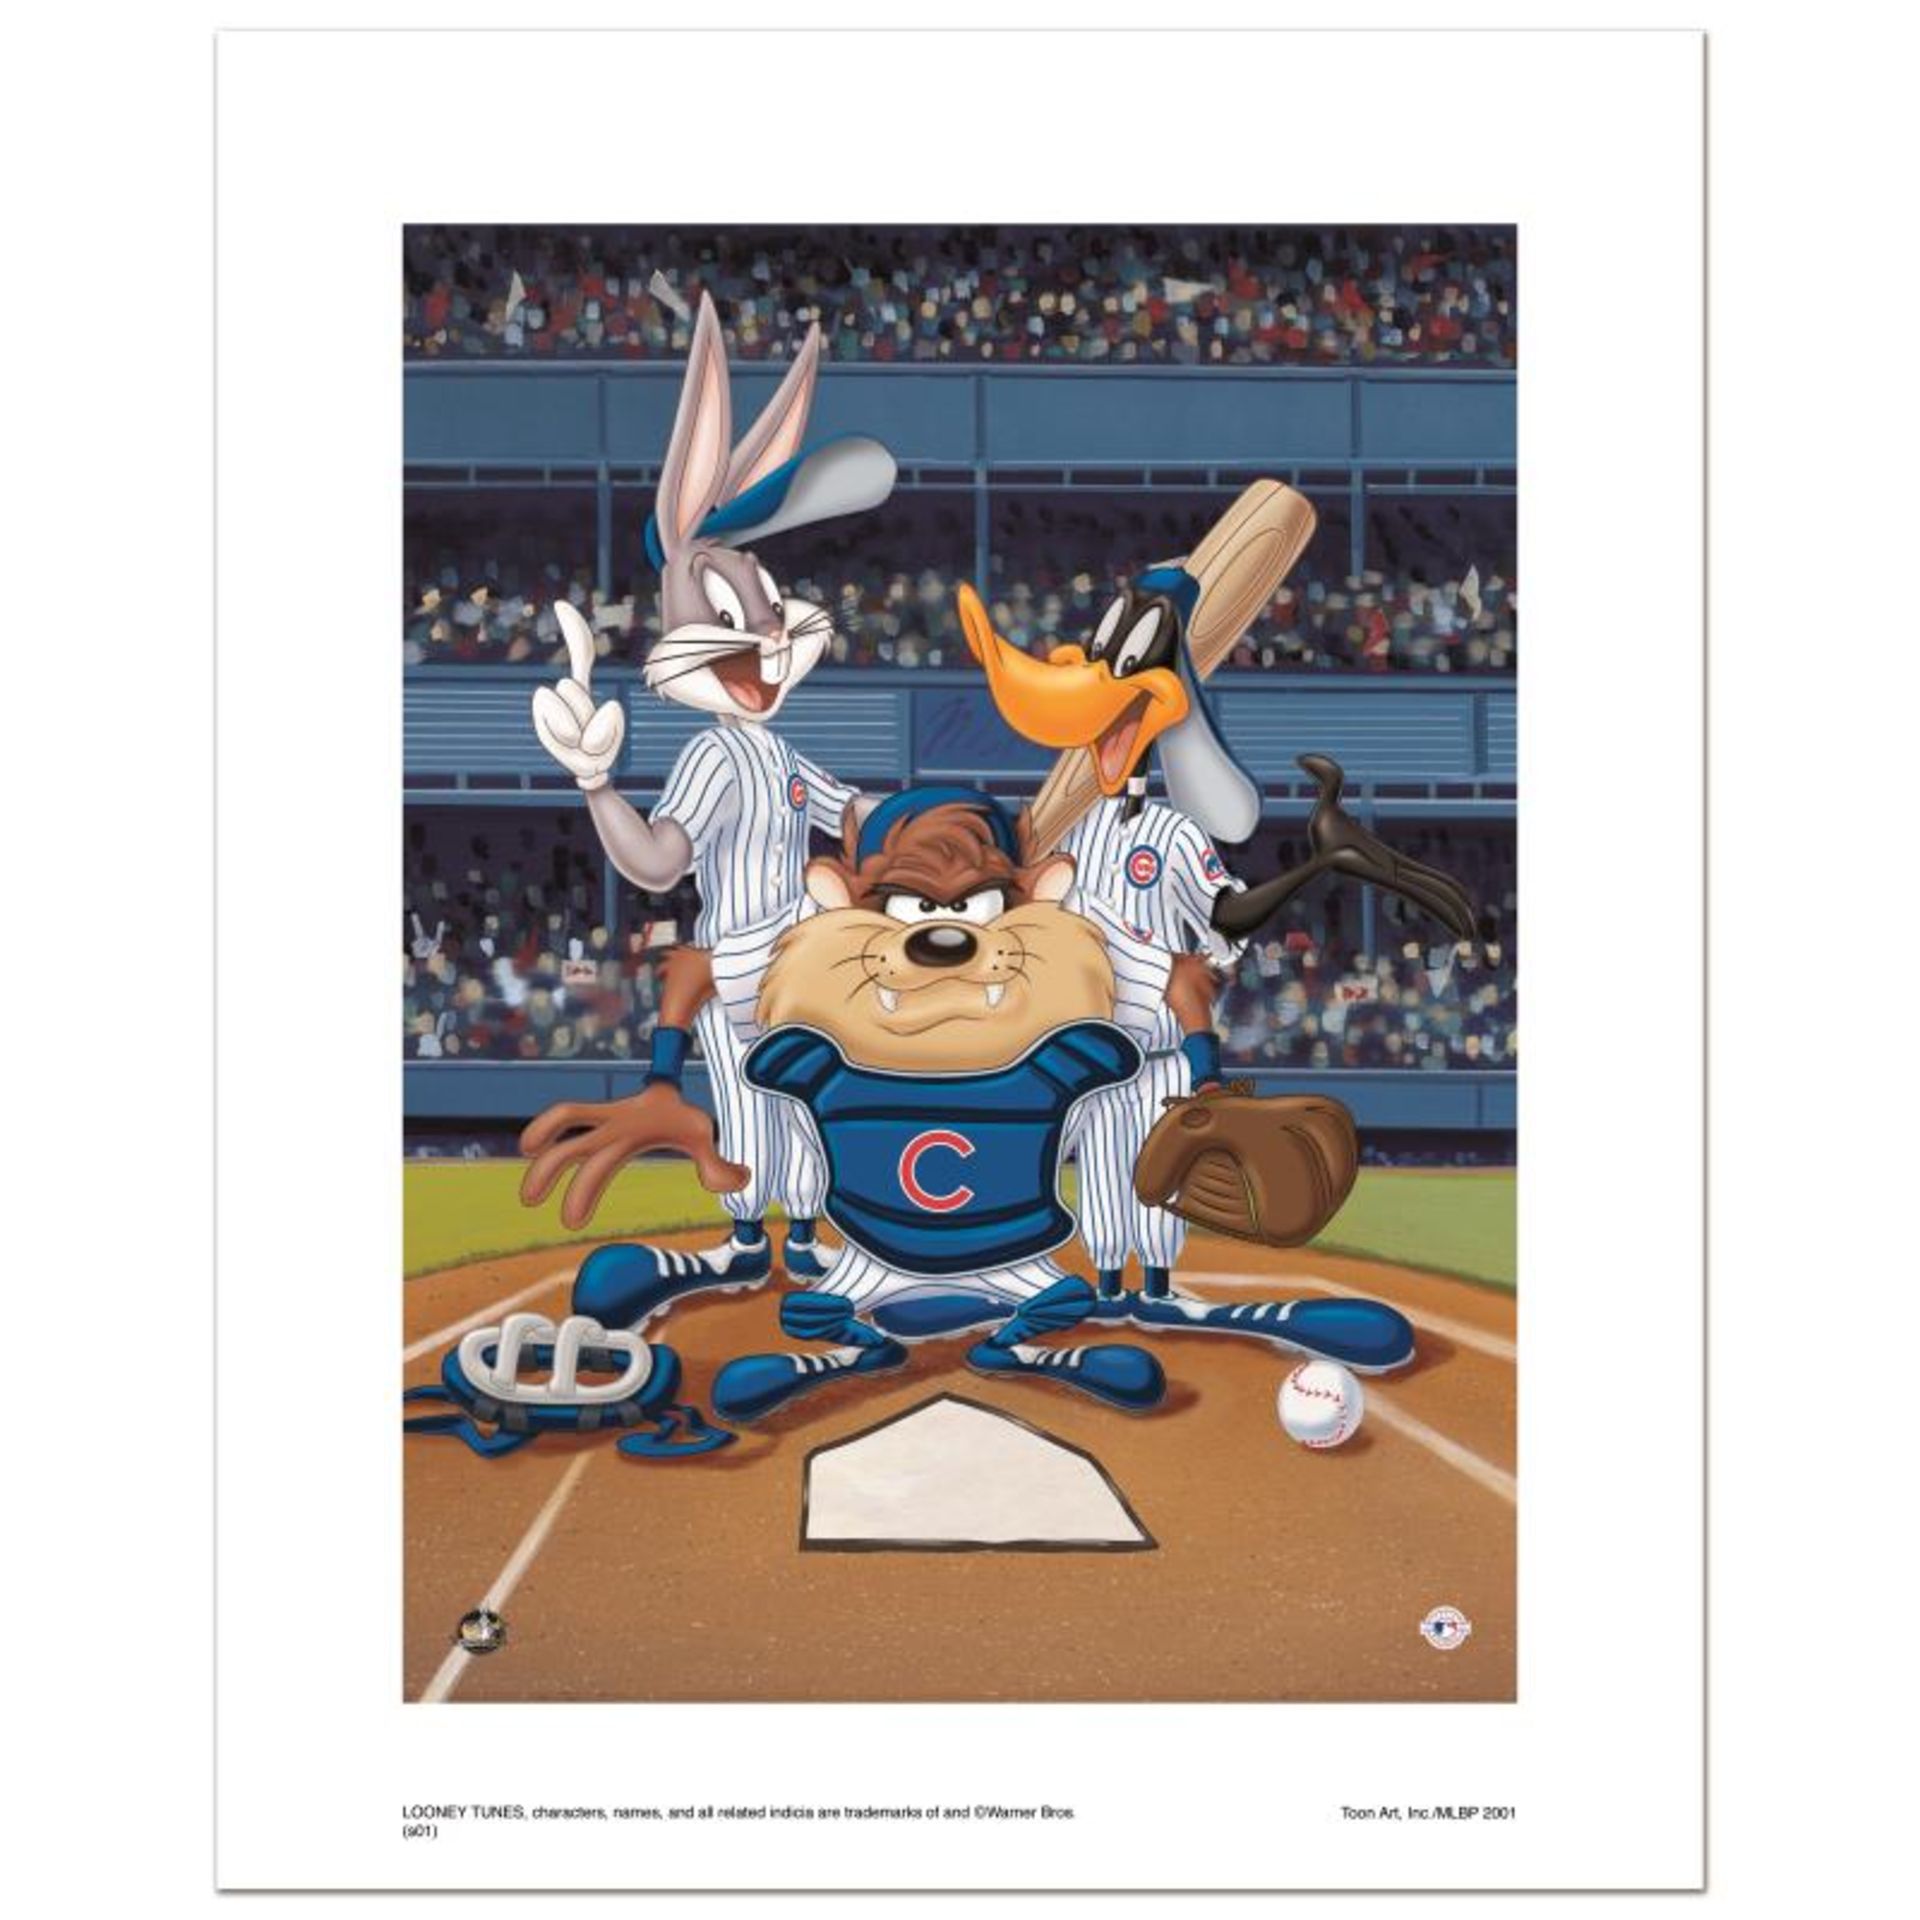 "At the Plate (Cubs)" Numbered Limited Edition Giclee from Warner Bros. with Cer